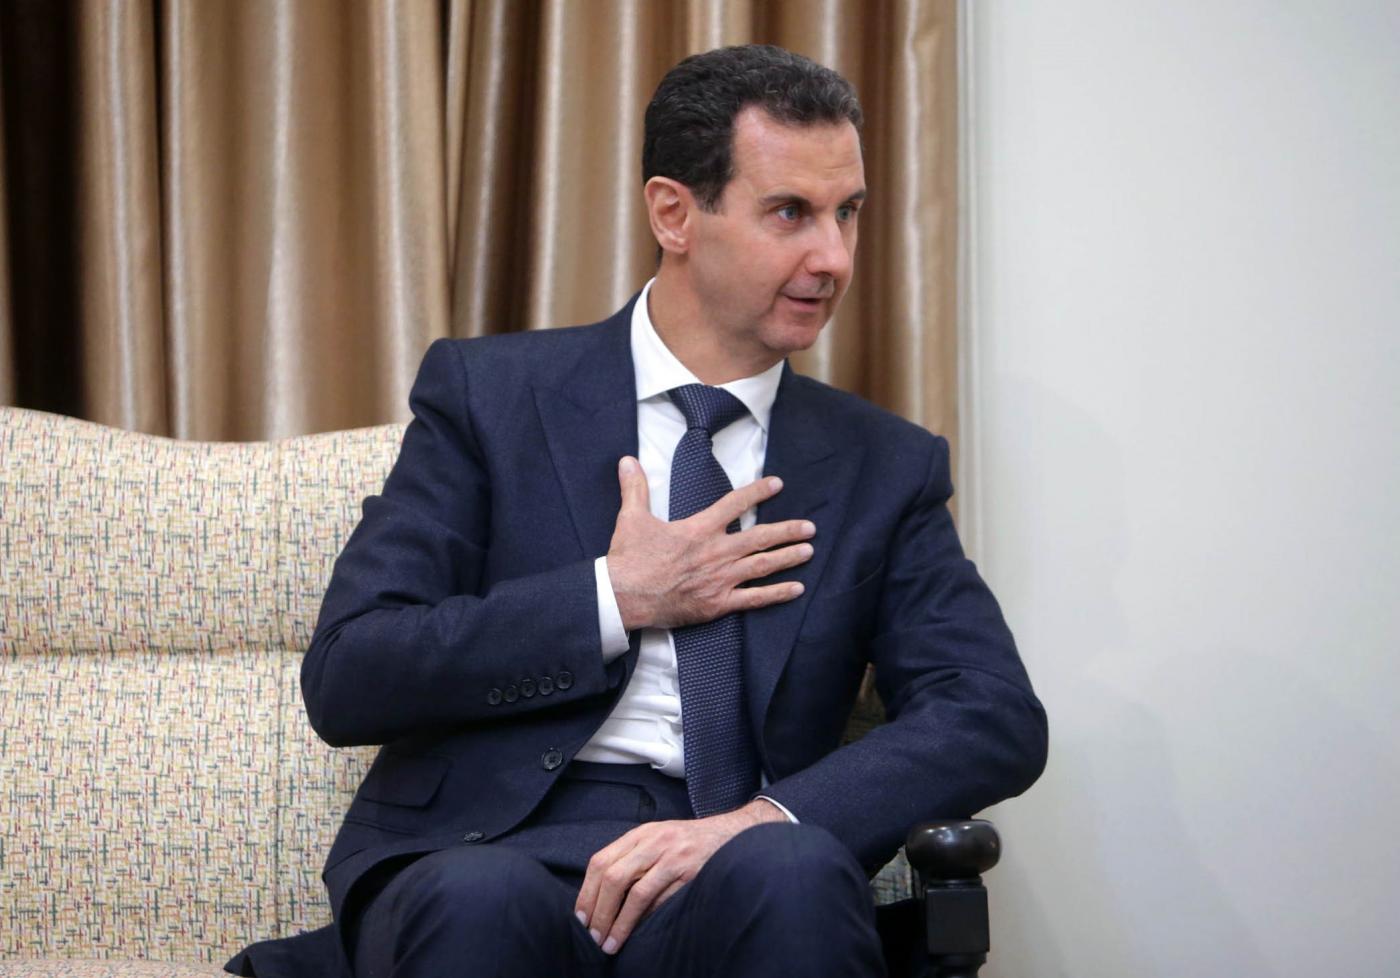 Syria war: Why did Assad restructure the military-security apparatus?